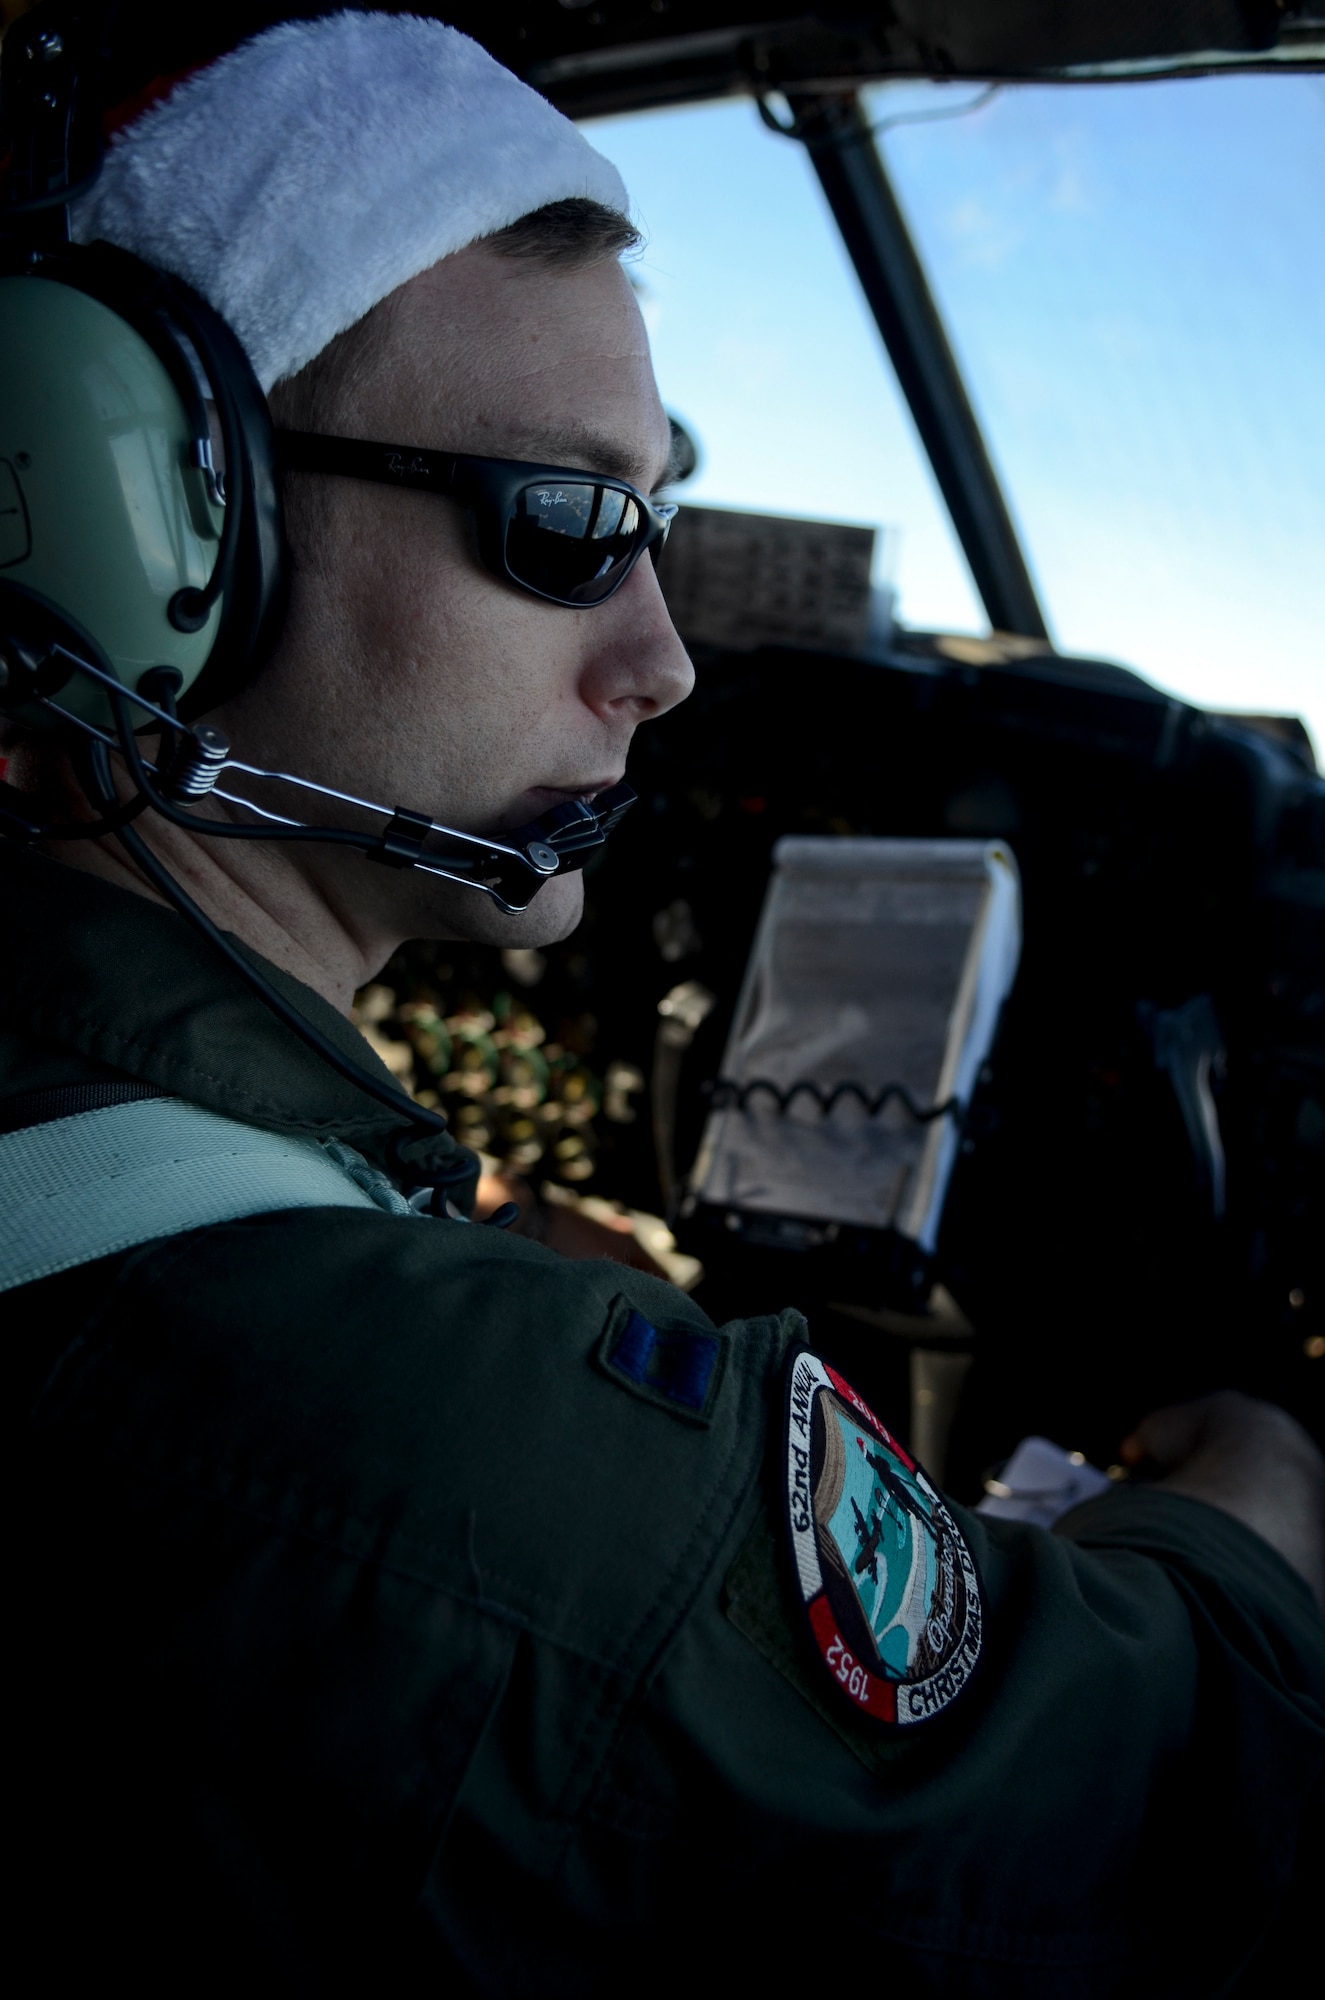 Capt. Michael Kelly, 36th Airlift Squadron C-130 Hercules pilot from Yokota Air Base, Japan, looks out the window from the flight deck of the aircraft while flying over the Pacific Ocean during an Operation Christmas Drop mission Dec. 11, 2013. This year marks the 62nd year of Operation Christmas Drop, which began in 1952, making it the world's longest running airdrop mission. (U.S. Air Force photo by Senior Airman Marianique Santos/Released)